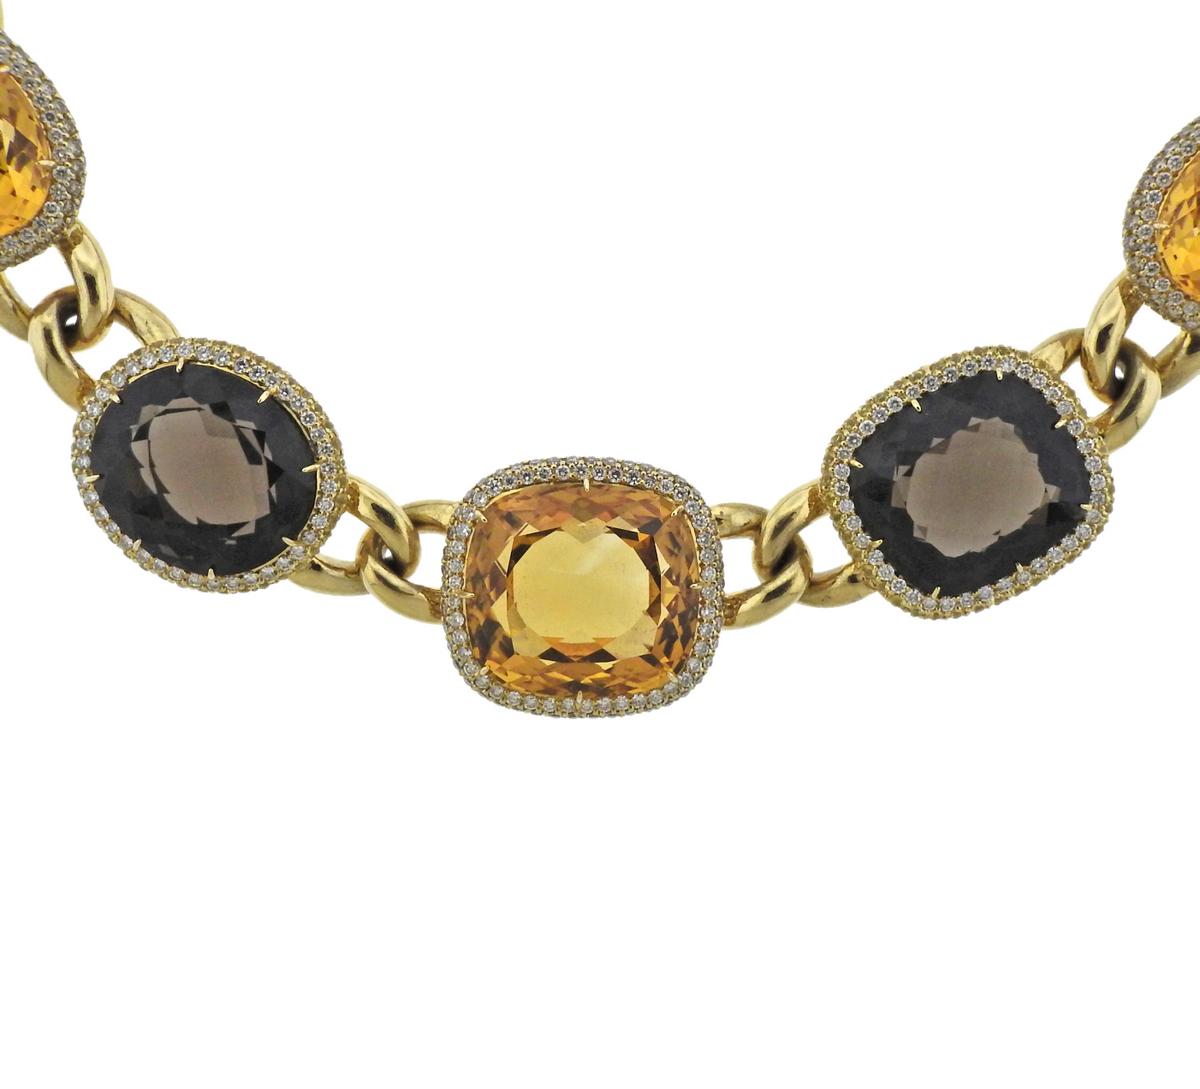 Gorgeous circa 1980s 18k gold cocktail necklace, set with multi shape topaz gems, surrounded with a total of approximately 9.50-10ctw in GH/VS diamonds. Necklace is 16